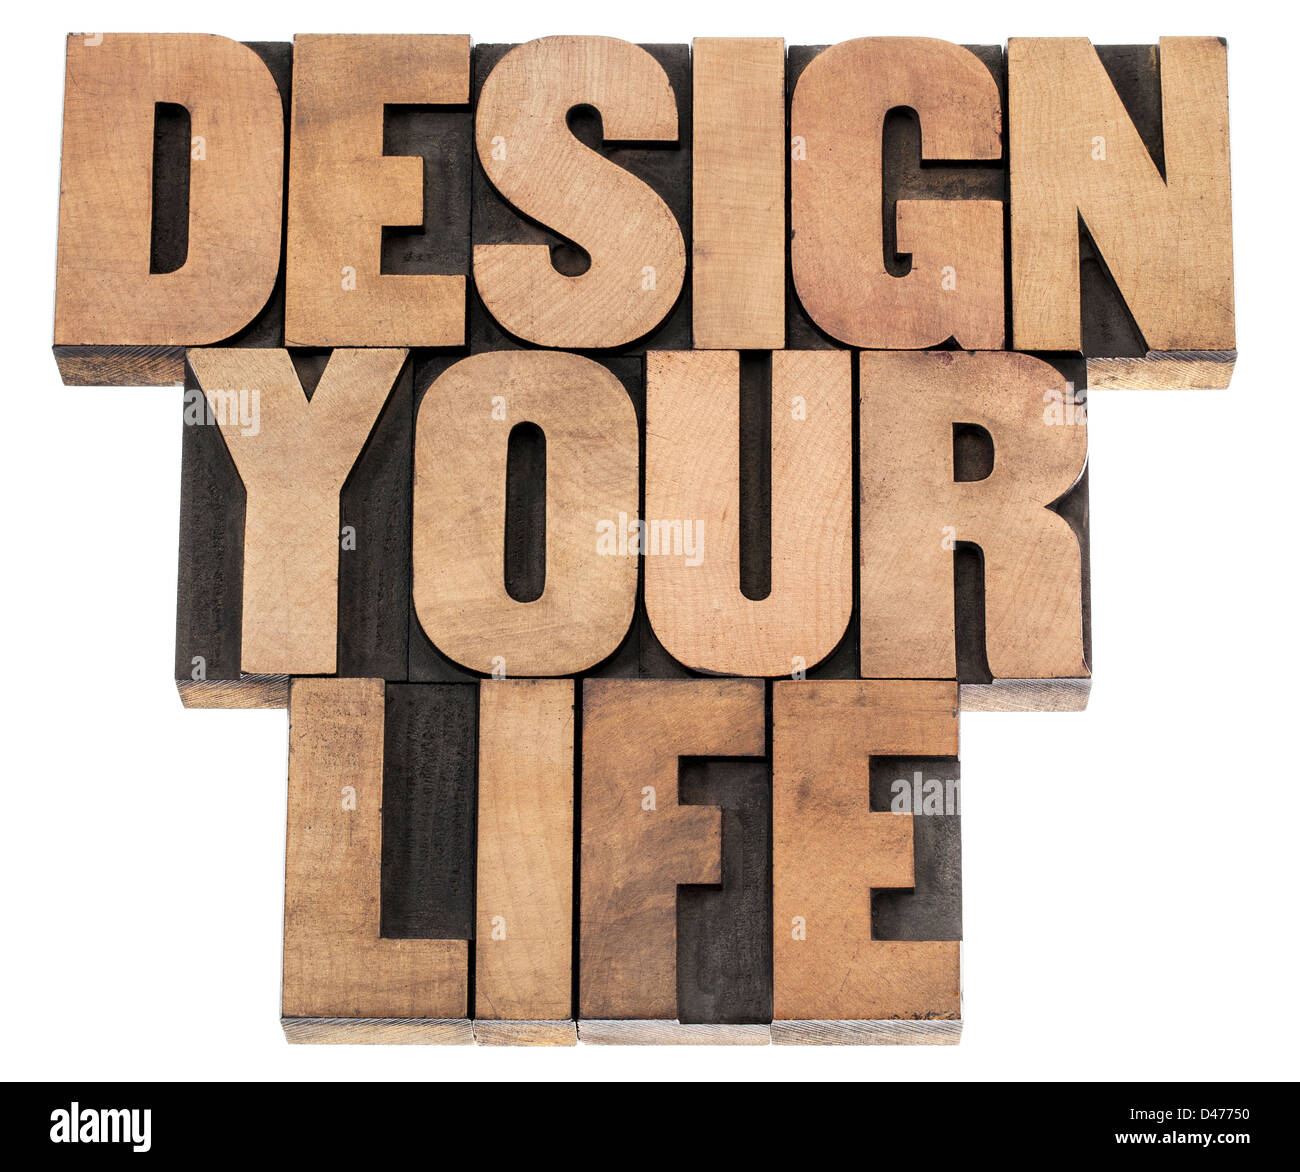 design your life - self development concept - isolated text in letterpress wood type printing blocks Stock Photo